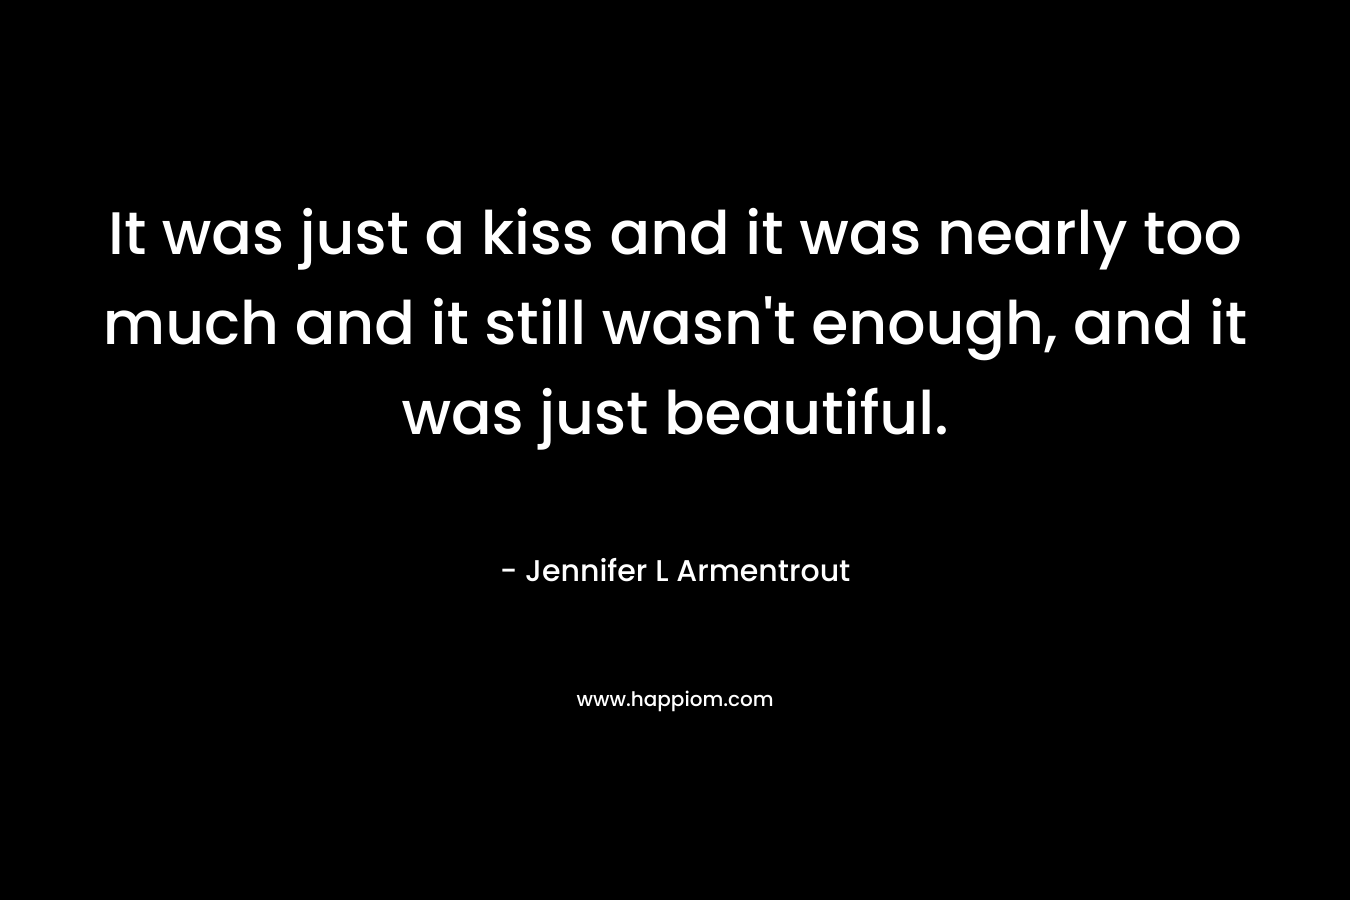 It was just a kiss and it was nearly too much and it still wasn't enough, and it was just beautiful.